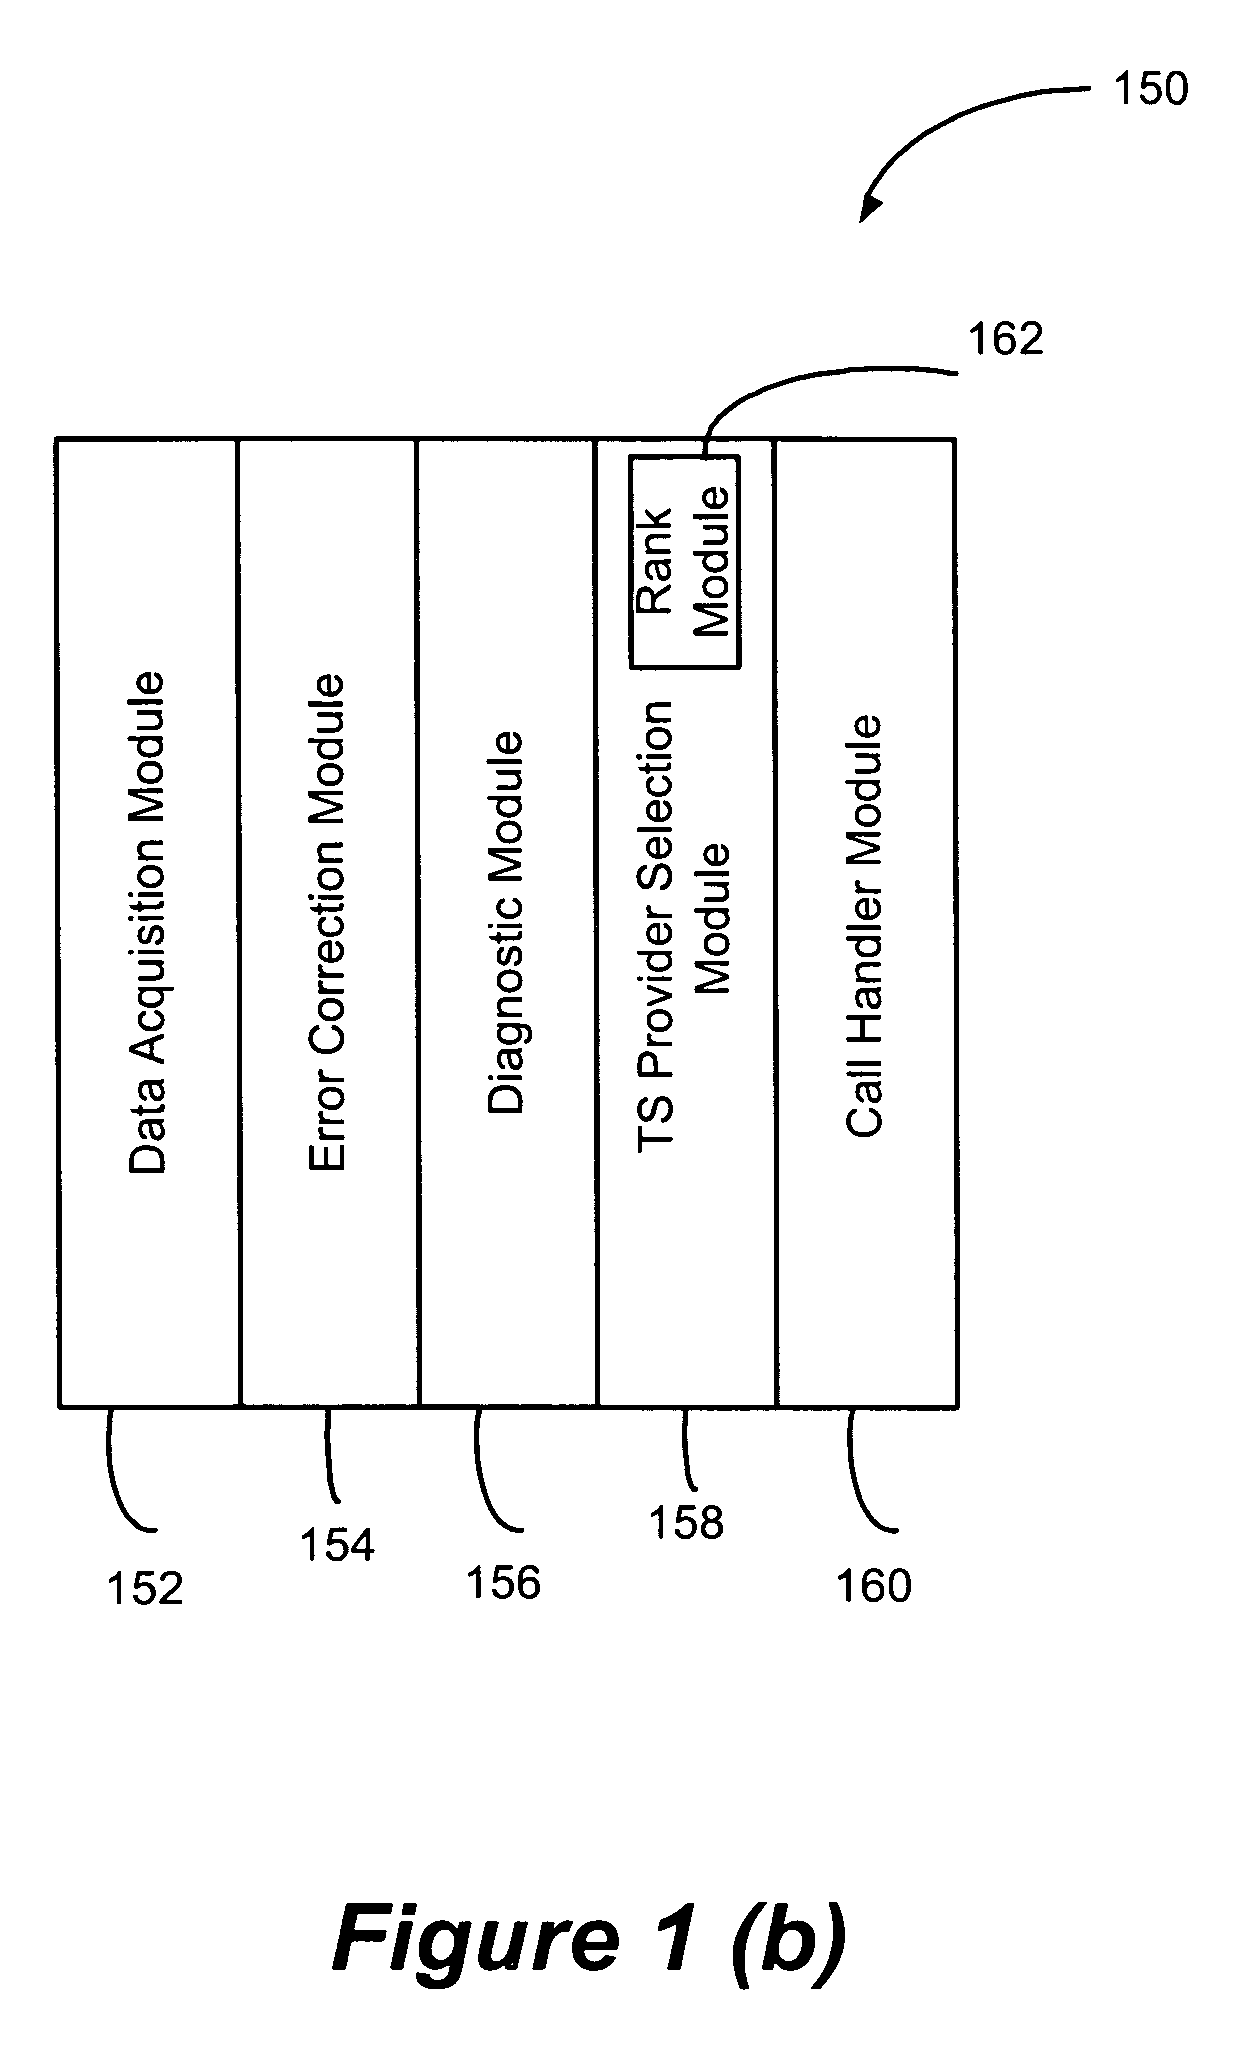 Method and system for the service and support of computing systems